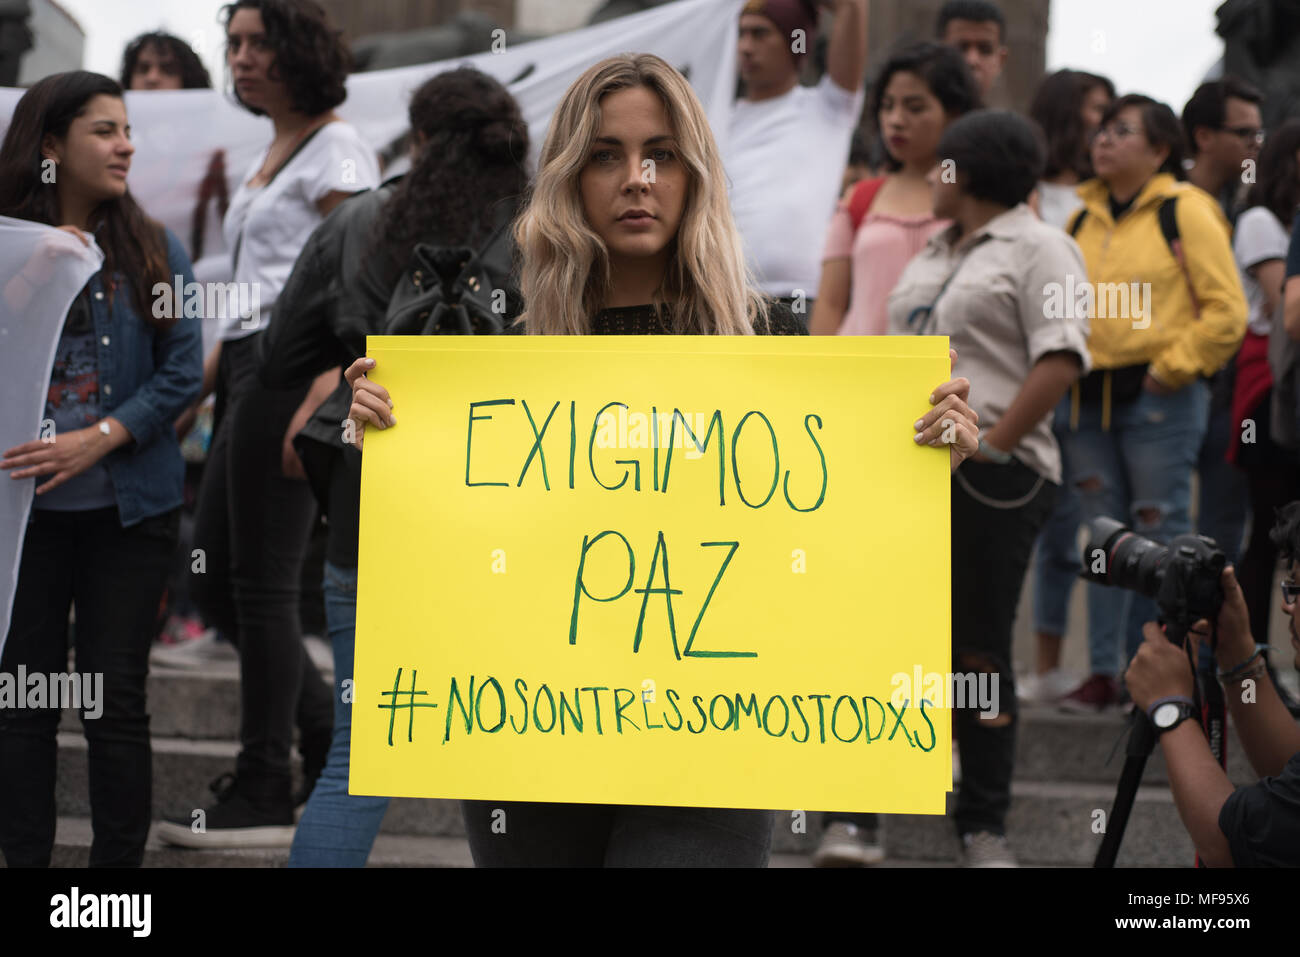 Mexico City, Mexico. 24th April, 2018.  A protester holds a banner that reads 'Exigimos paz' ('We demand peace'). Hundreds rallied to protest for the killing of three students in Guadalajara, Mexico. Credit: Miguel A. Aguilar-Mancera/Alamy Live News Stock Photo